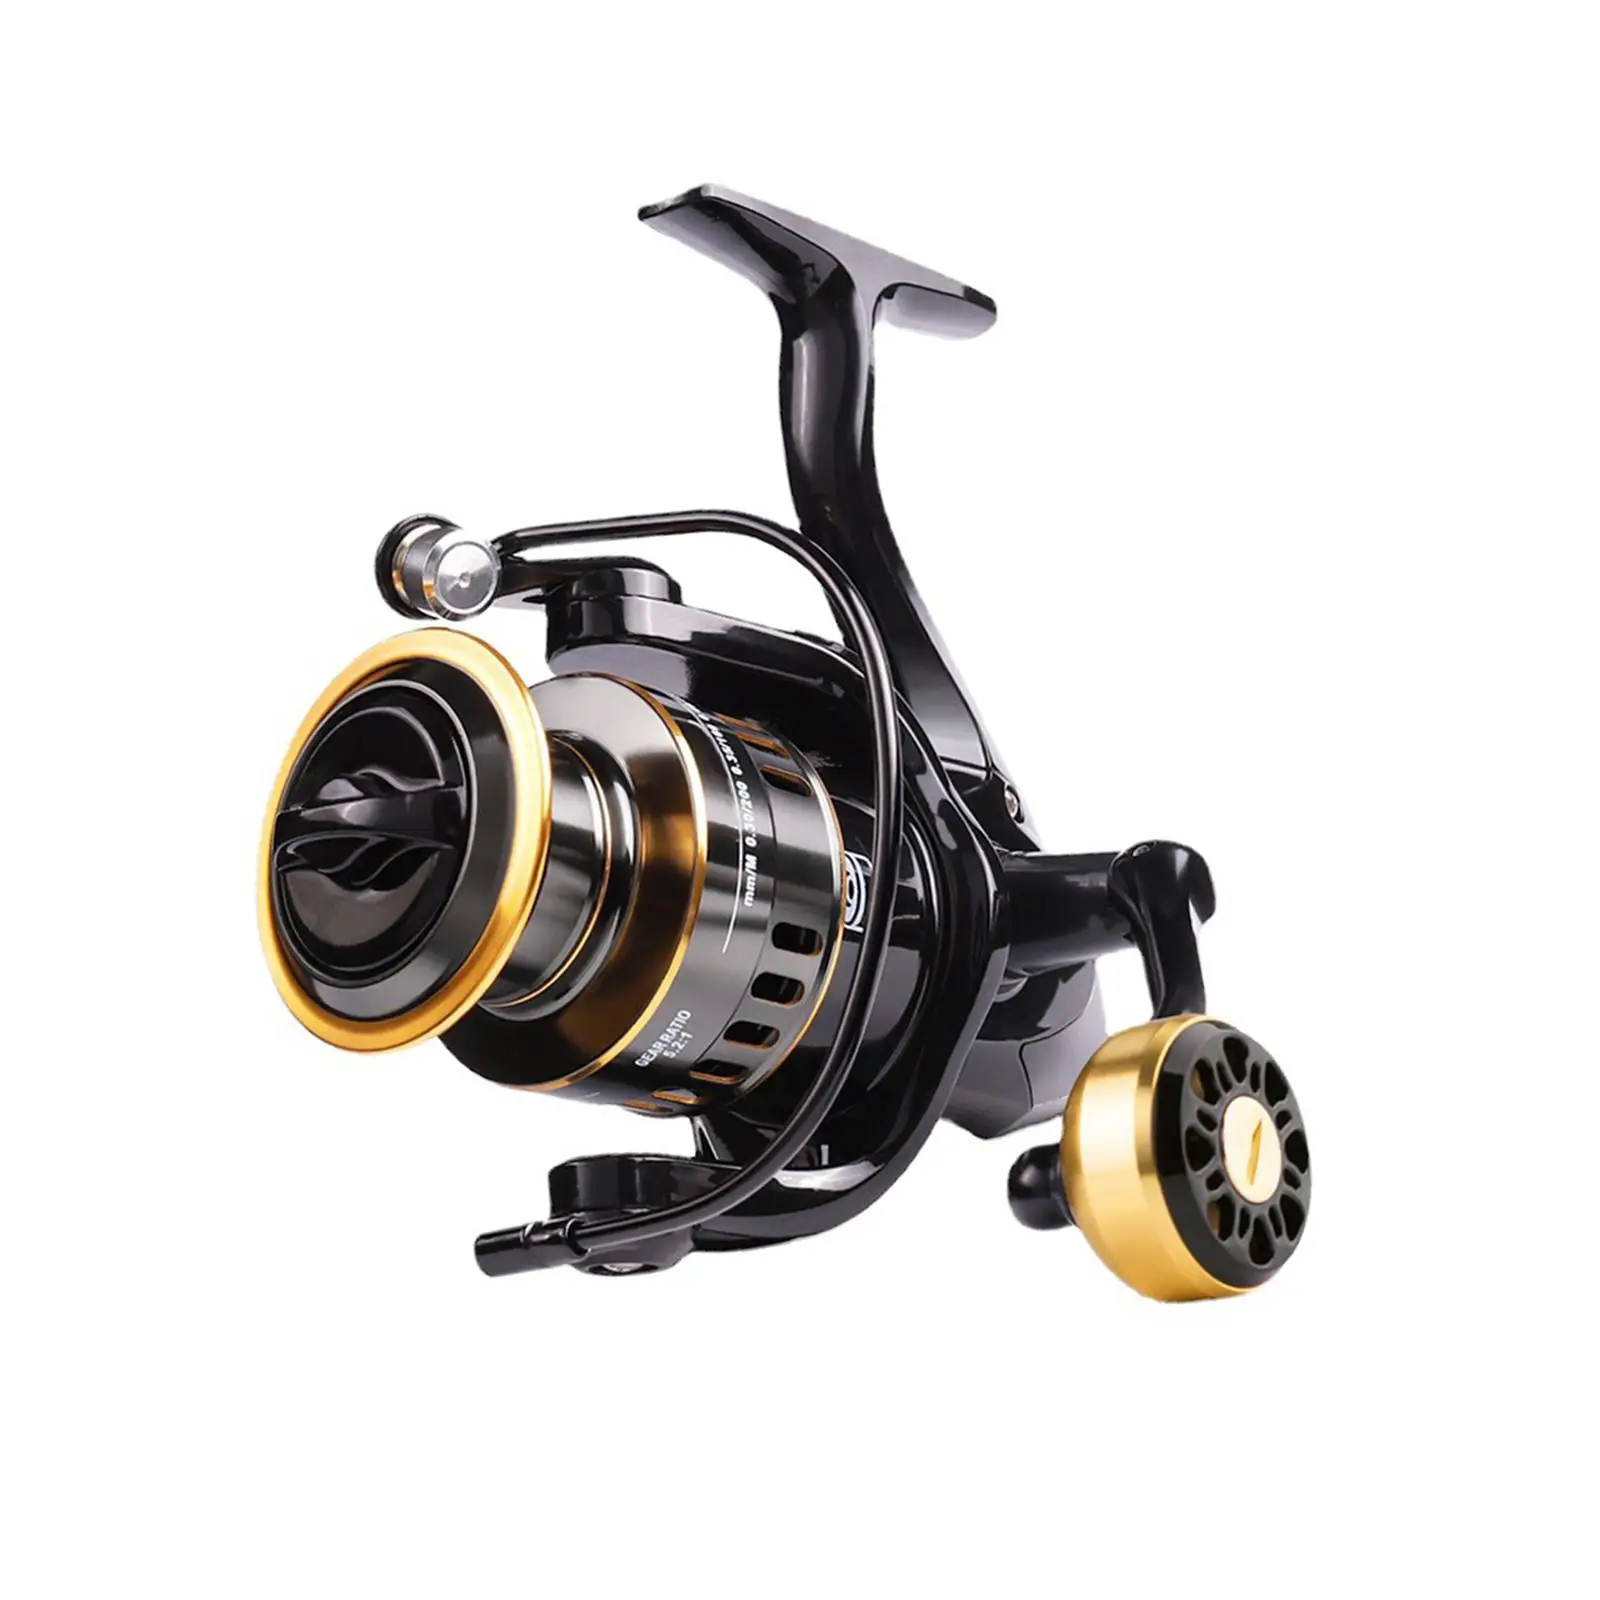 Fishing Reel Baitcasting Gear High Speed Smooth Left Right Interchangeable for Trout